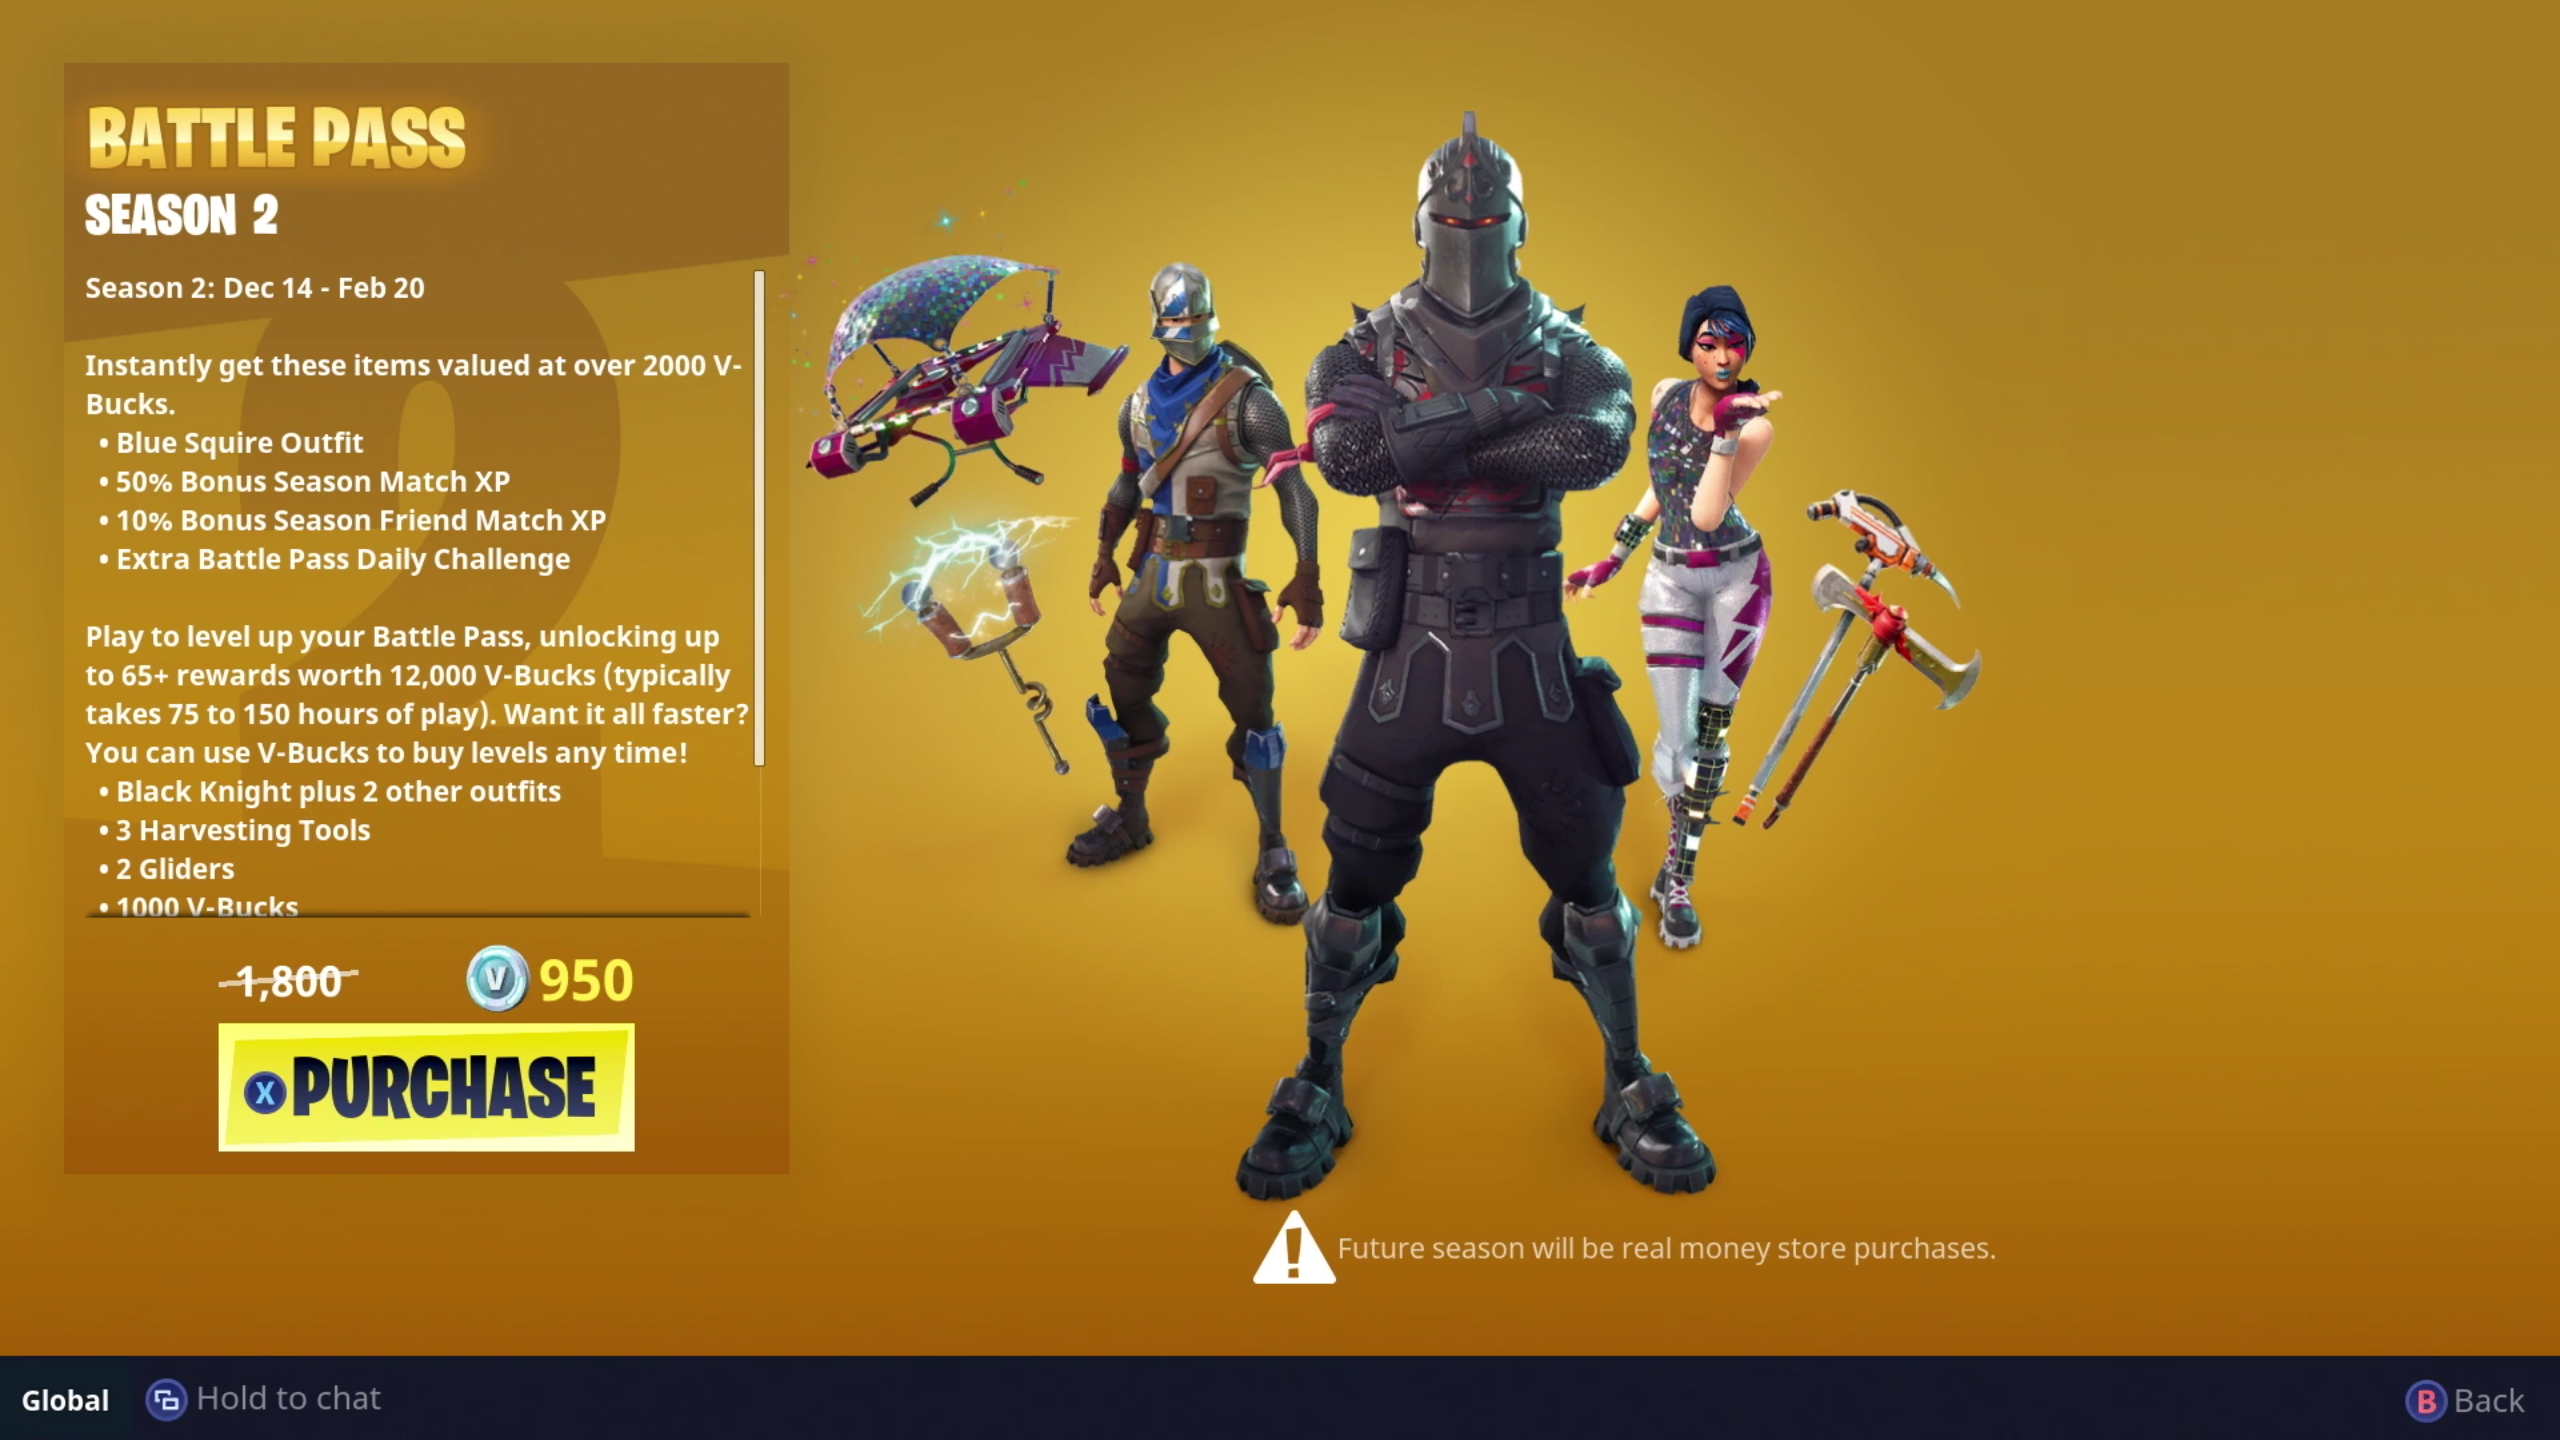 Fortnite Battle Royal What's New? — Steemit - 2560 x 1440 png 1818kB